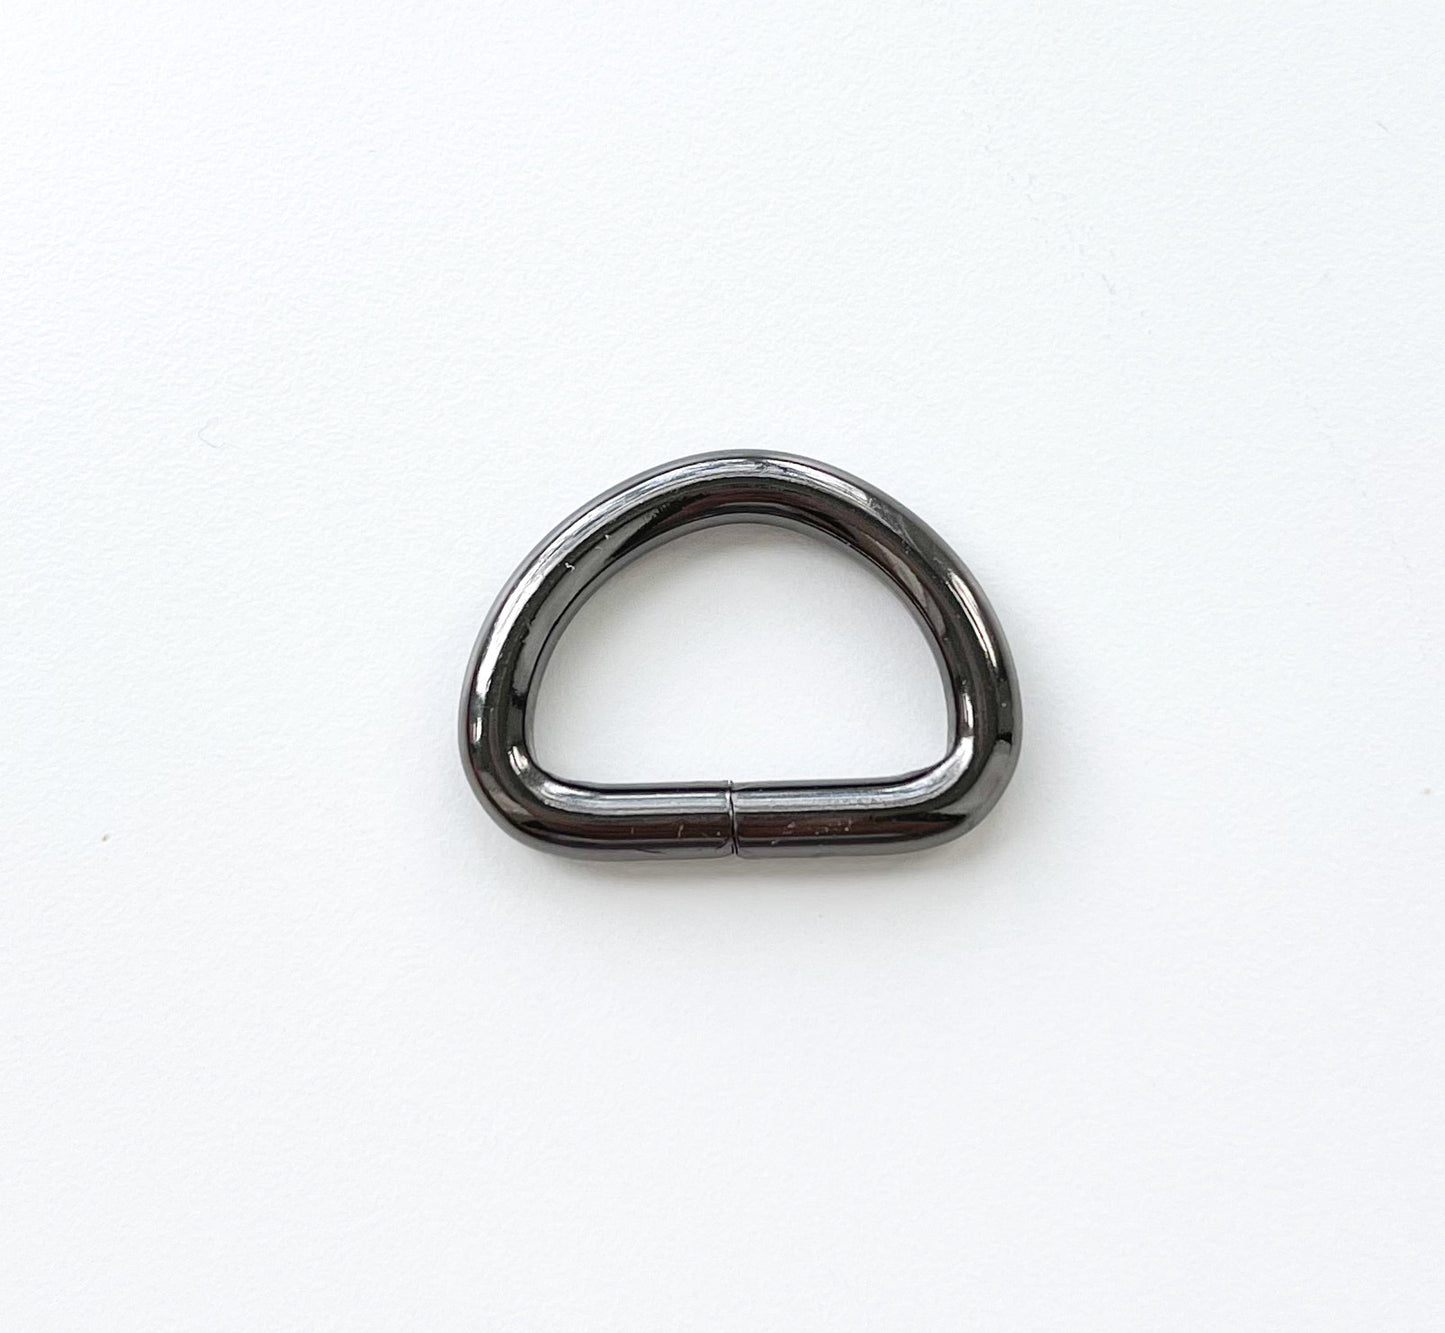 D-ring size: 1” (25mm)